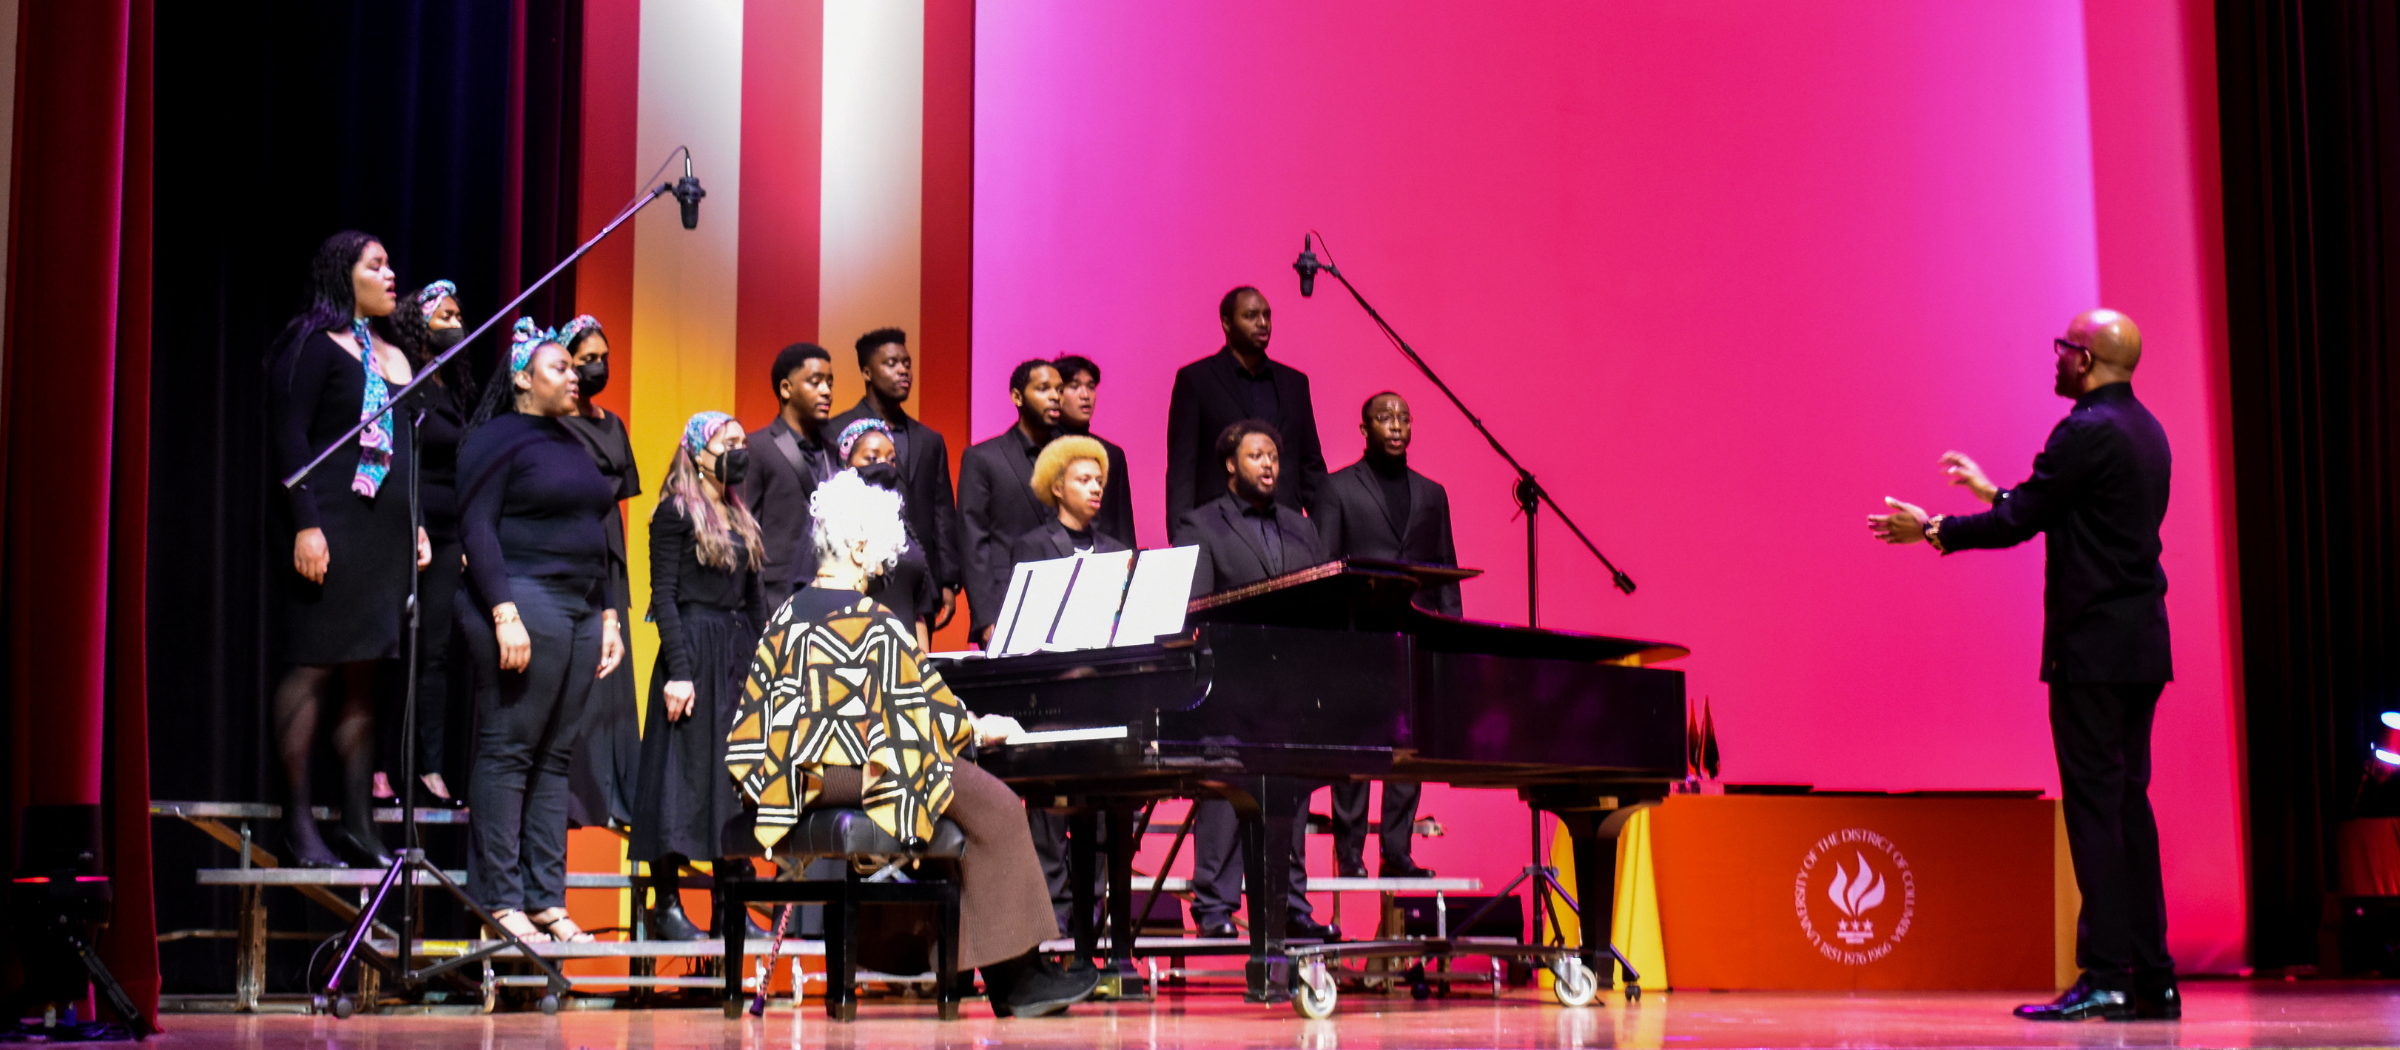 UDC’s diverse Music Program offers performance and pedagogy